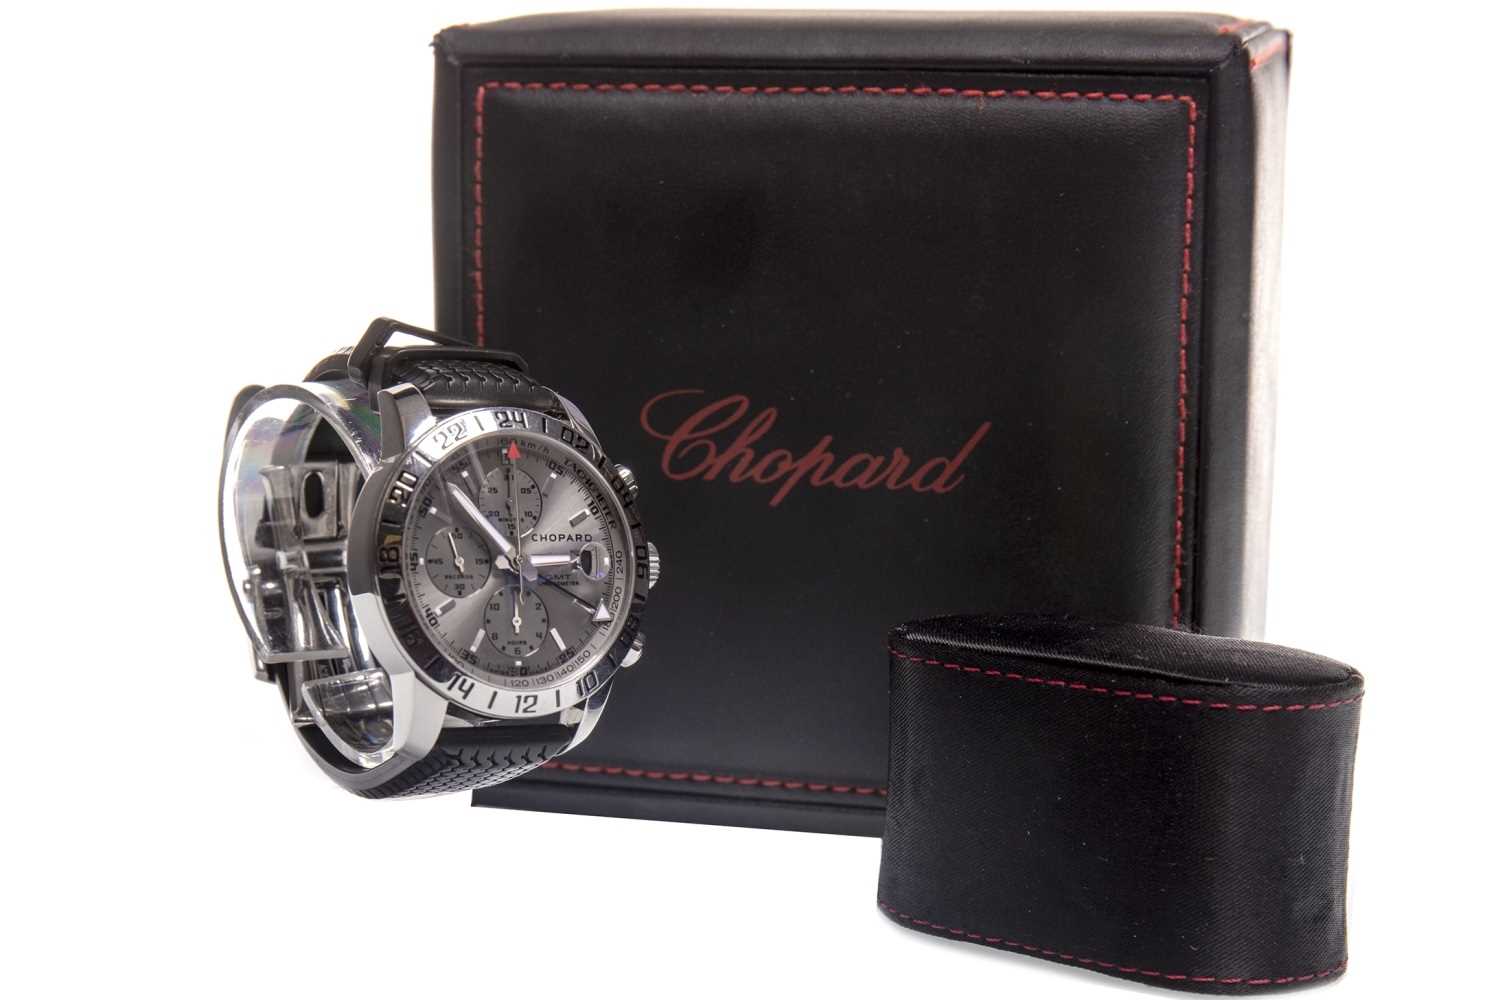 Lot 814 - Amendment- this is not a rattrapante example GENTLEMAN'S CHOPARD 1000 MIGLIA STEEL AUTOMATIC WATCH